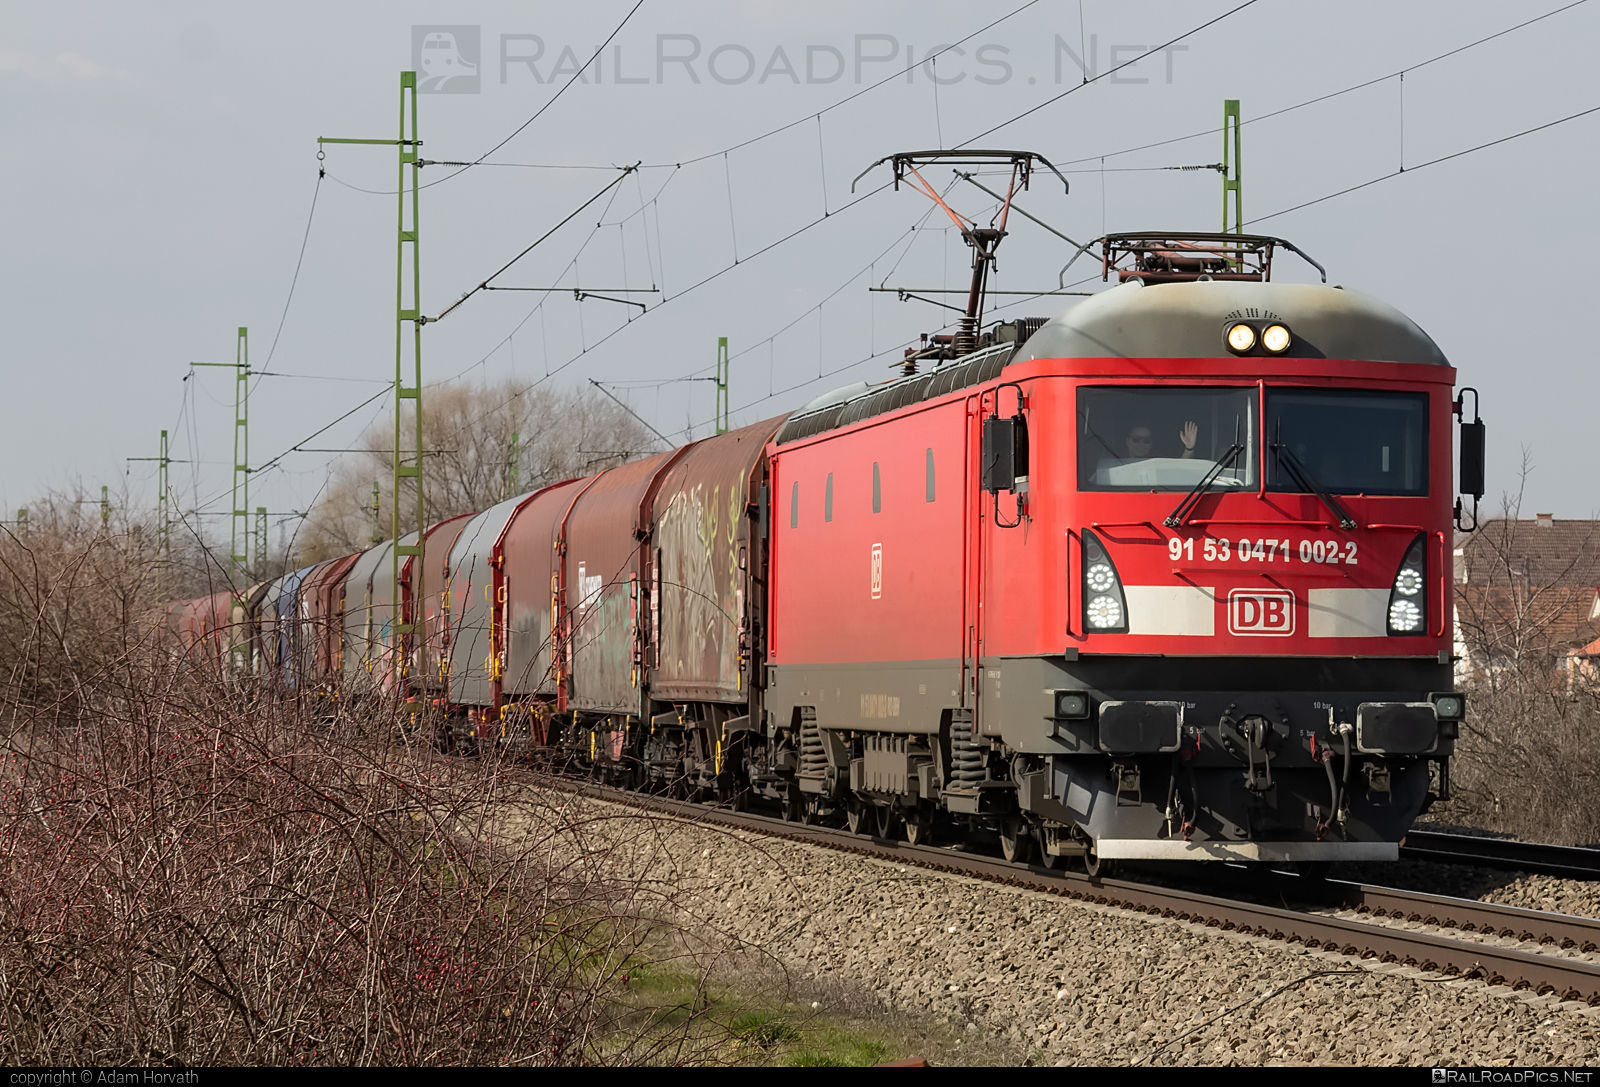 Softronic Phoenix - 471 002-2 operated by DB Cargo Hungária Kft #db #dbcargo #dbcargohungaria #dbh #softronic #softronicphoenix